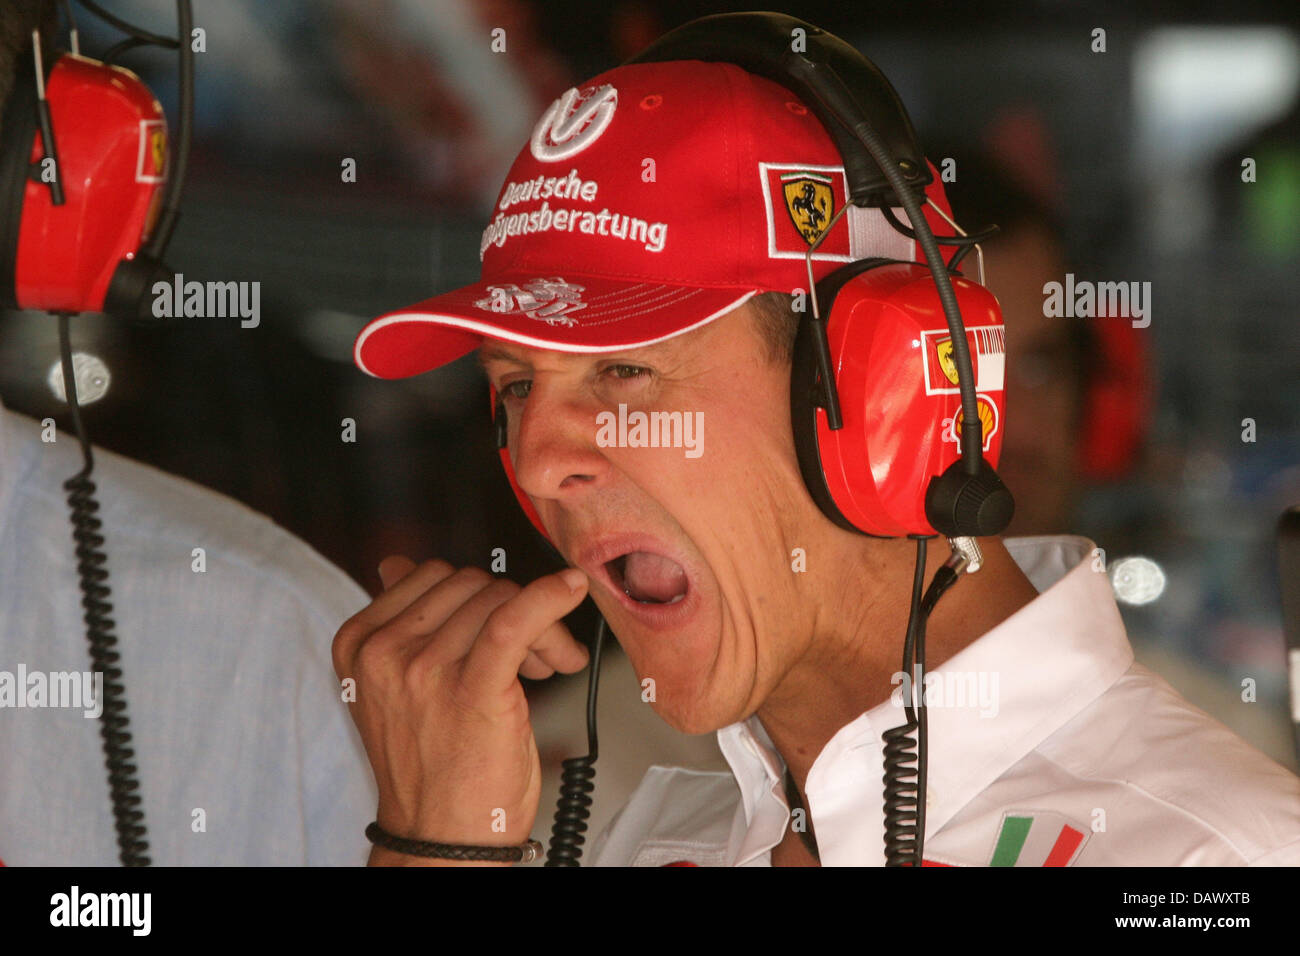 Former Formula One world champion Michael Schumacher touches his face in the Ferrari box during the third practice session at the Circuit de Catalunya race track near Barcelona, Spain, 12 May 2007. The 2007 Formula 1 Grand Prix of Spain takes place on 13 May. Photo: Jens Buettner Stock Photo